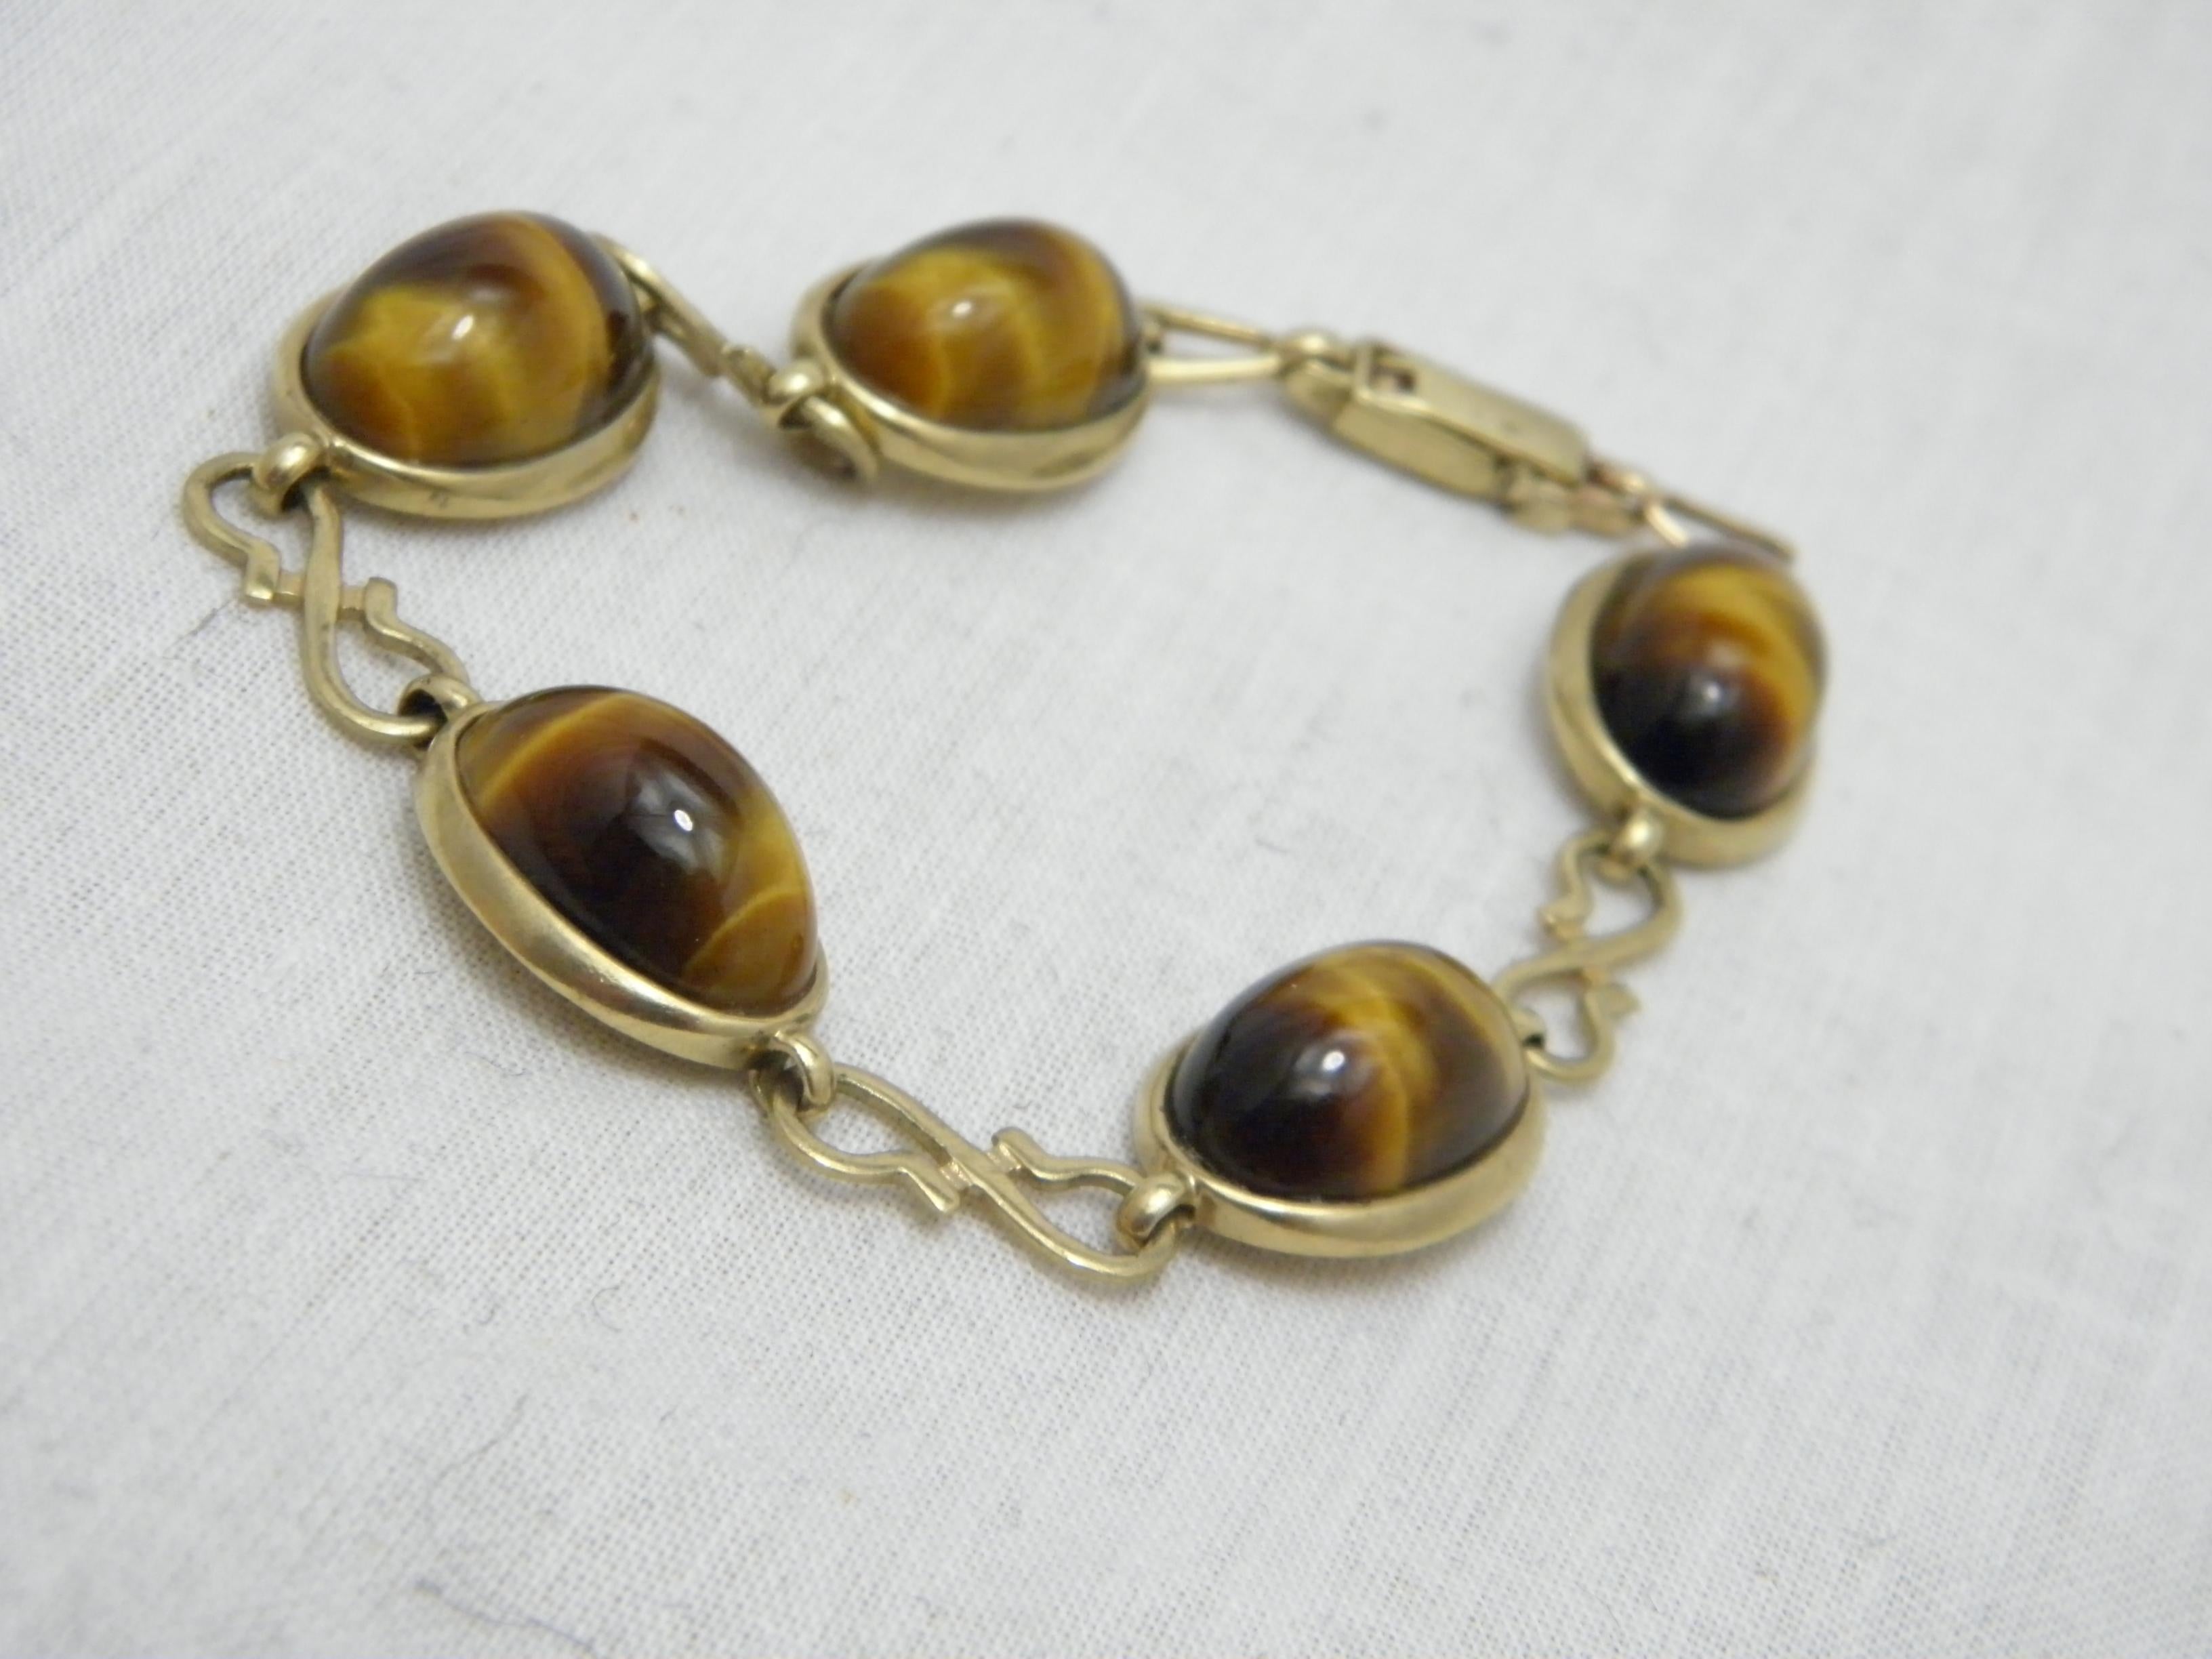 Victorian Antique 9ct Gold Heavy Tiger's Eye Bracelet 375 Purity Cabochon 19.7 g For Sale